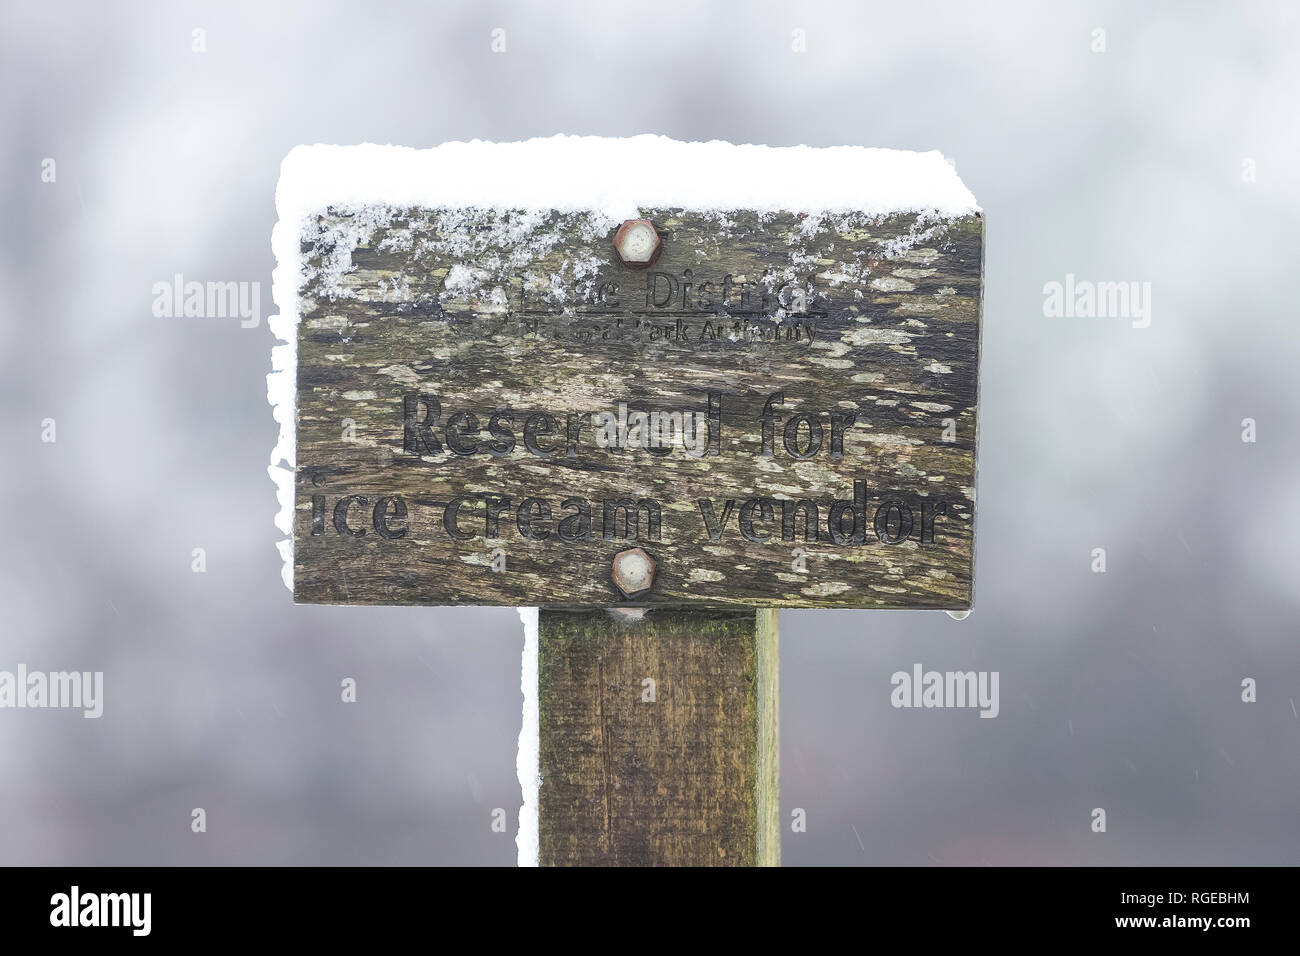 Thirlmere, Keswick, Cumbria. 29th Jan 2019. UK Weather: A sign labelled 'Reserved for Ice Cream Vendor', pictured in snowy conditions at Thirlmere, Keswick, Cumbria, UK. 29th January 2019. Photograph by Richard Holmes. Credit: Richard Holmes/Alamy Live News Stock Photo